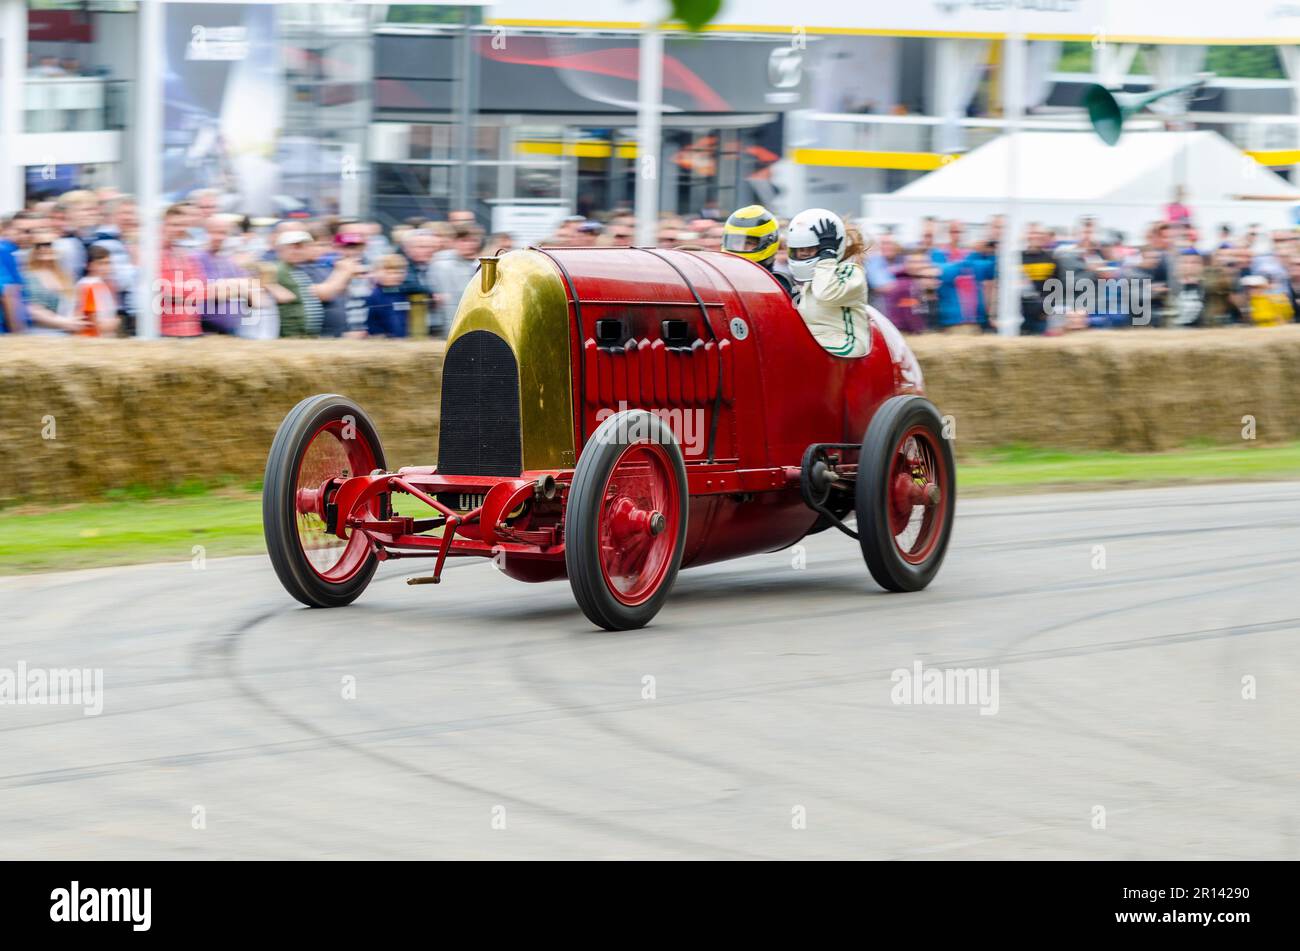 Fiat S76, nicknamed 'The Beast of Turin', at the Goodwood Festival of Speed 2016 motorsport event, West Sussex, UK. Racing up hill climb track Stock Photo